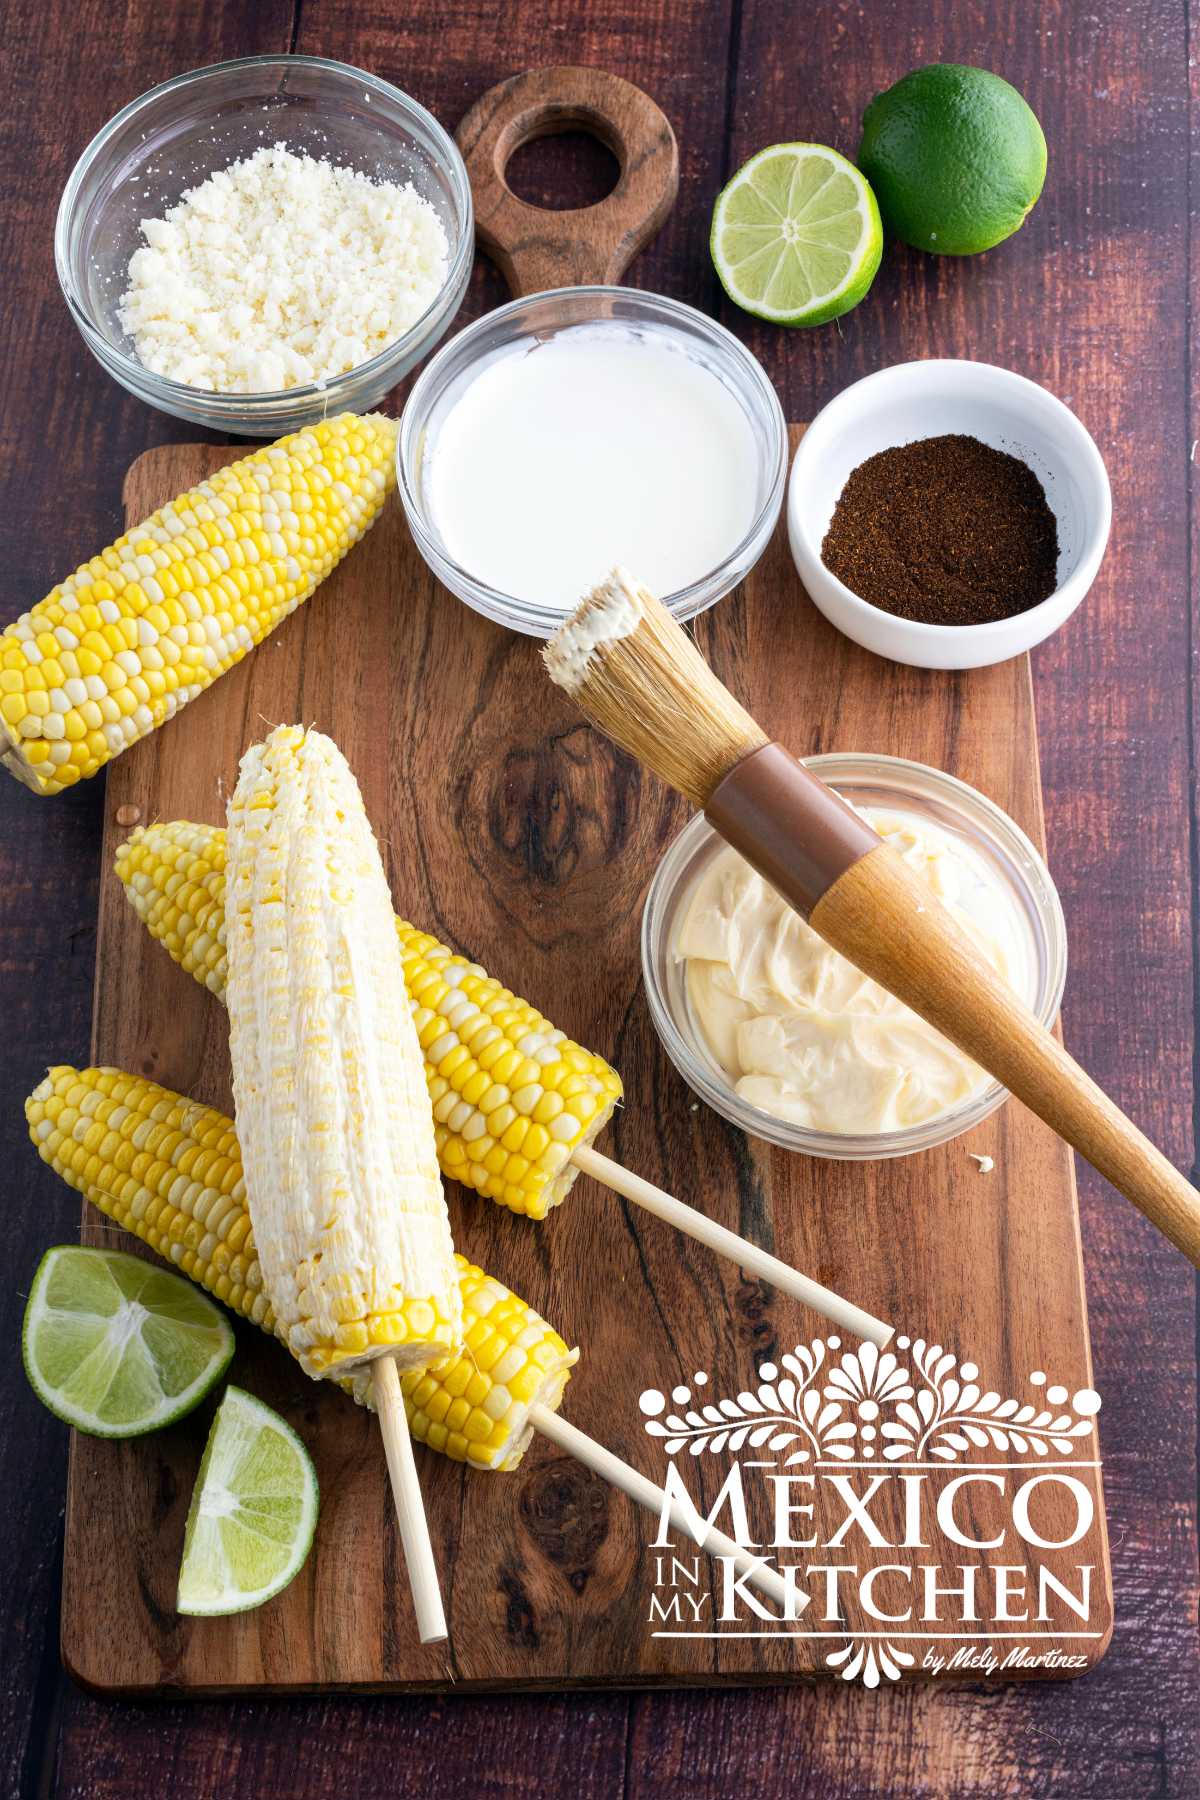 Corn on the cob with a wooden stick, cover with Mayo.